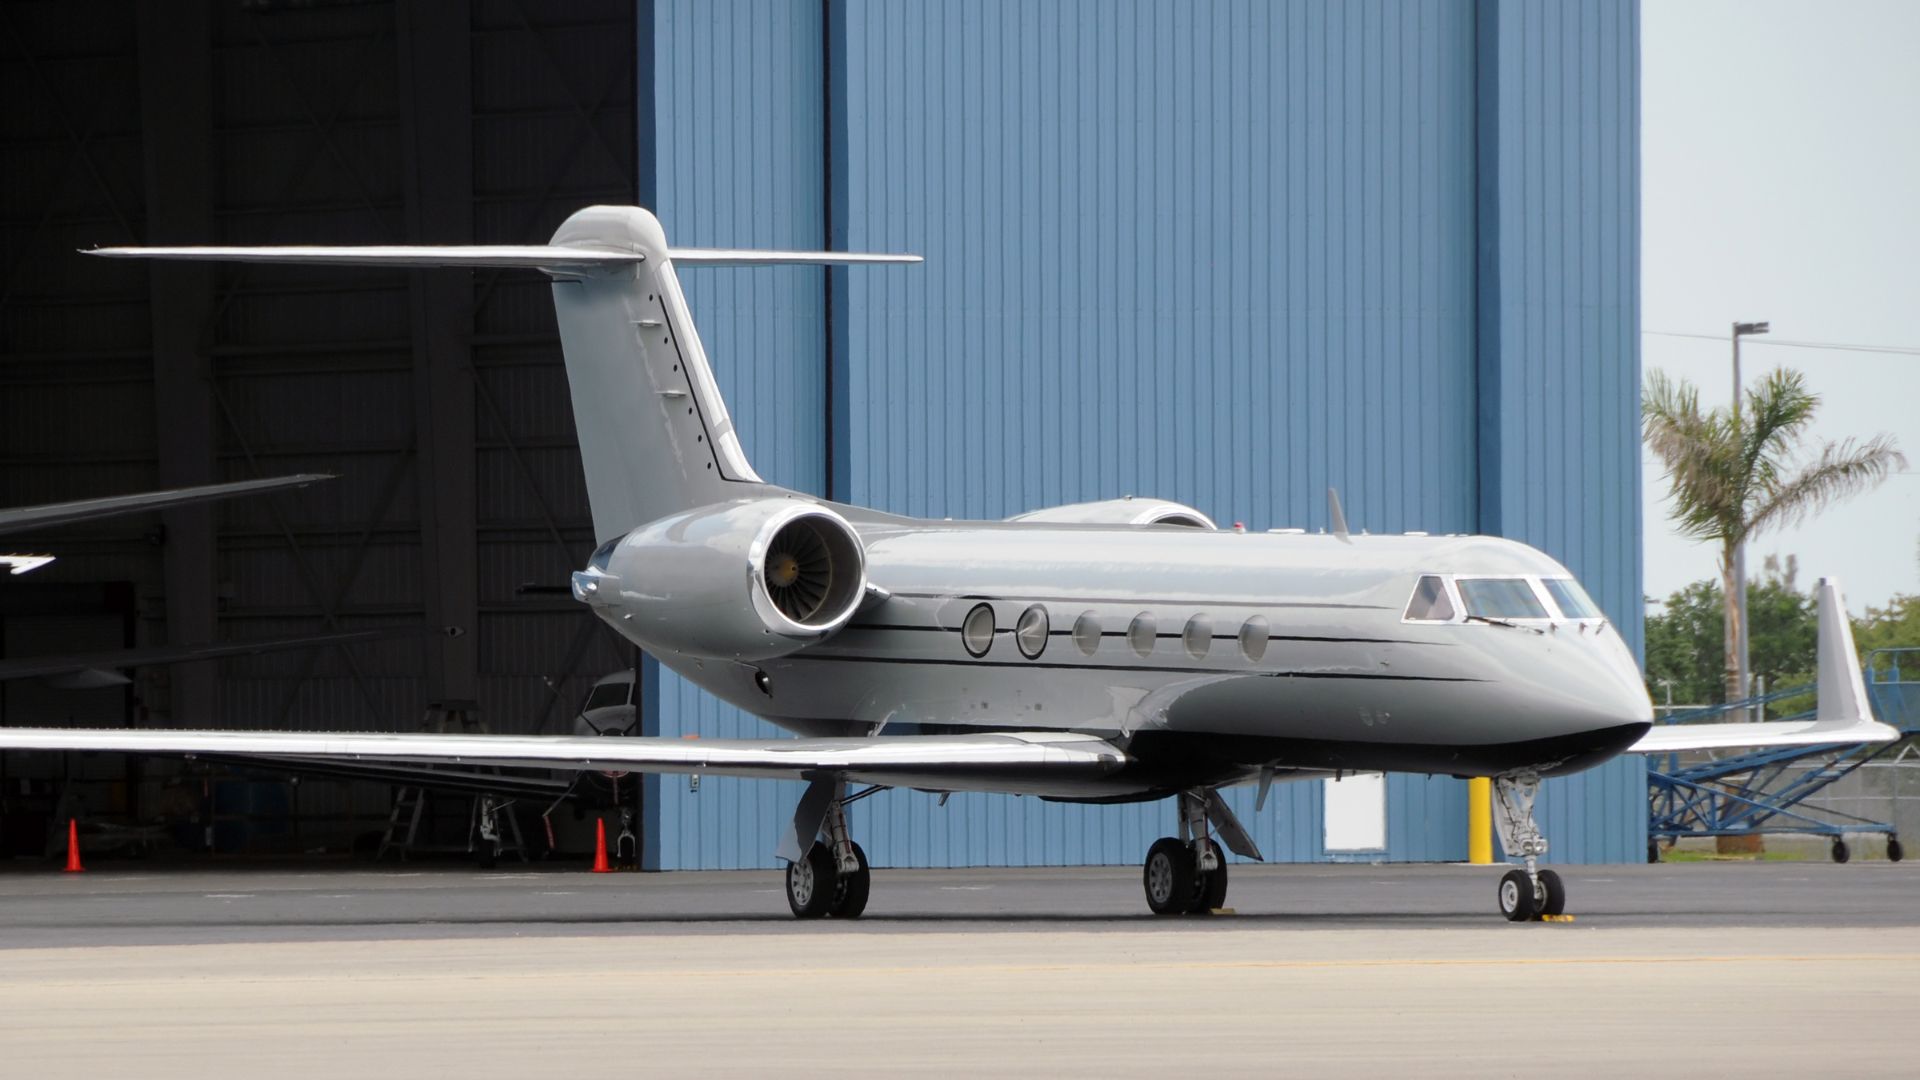 7 Things You Need to Check Before Hiring a Private Jet